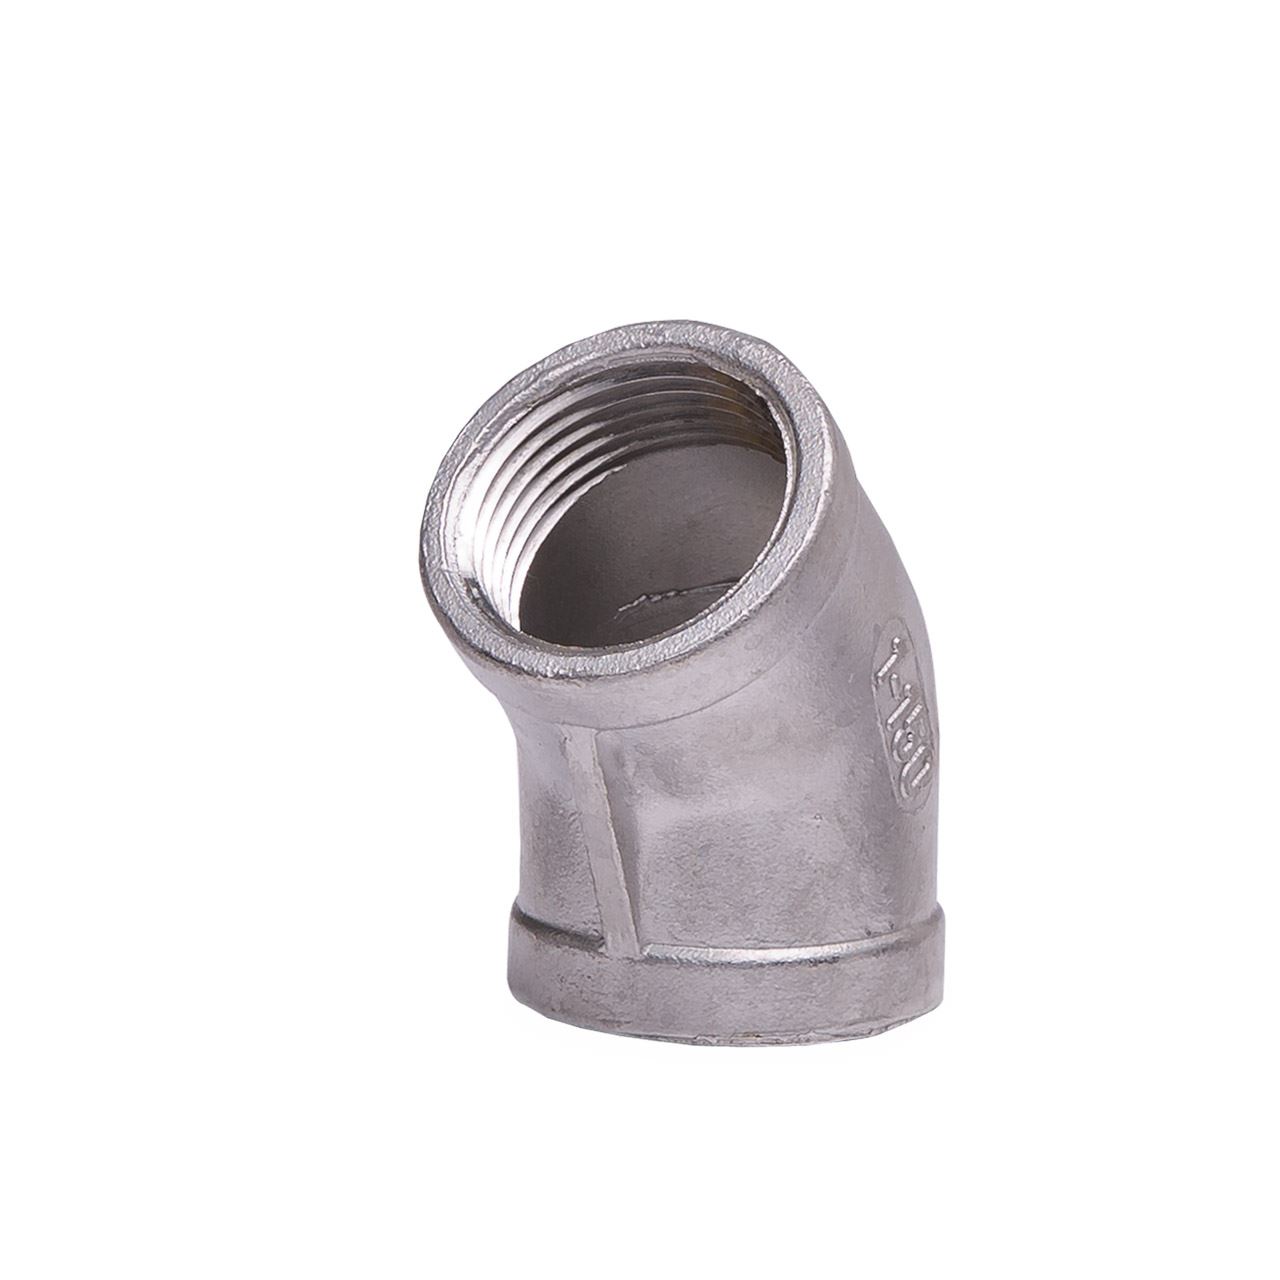 NEW 304 Stainless Steel Fitting 45° Elbow Degree For SS Pipe and Pipe Fittings 